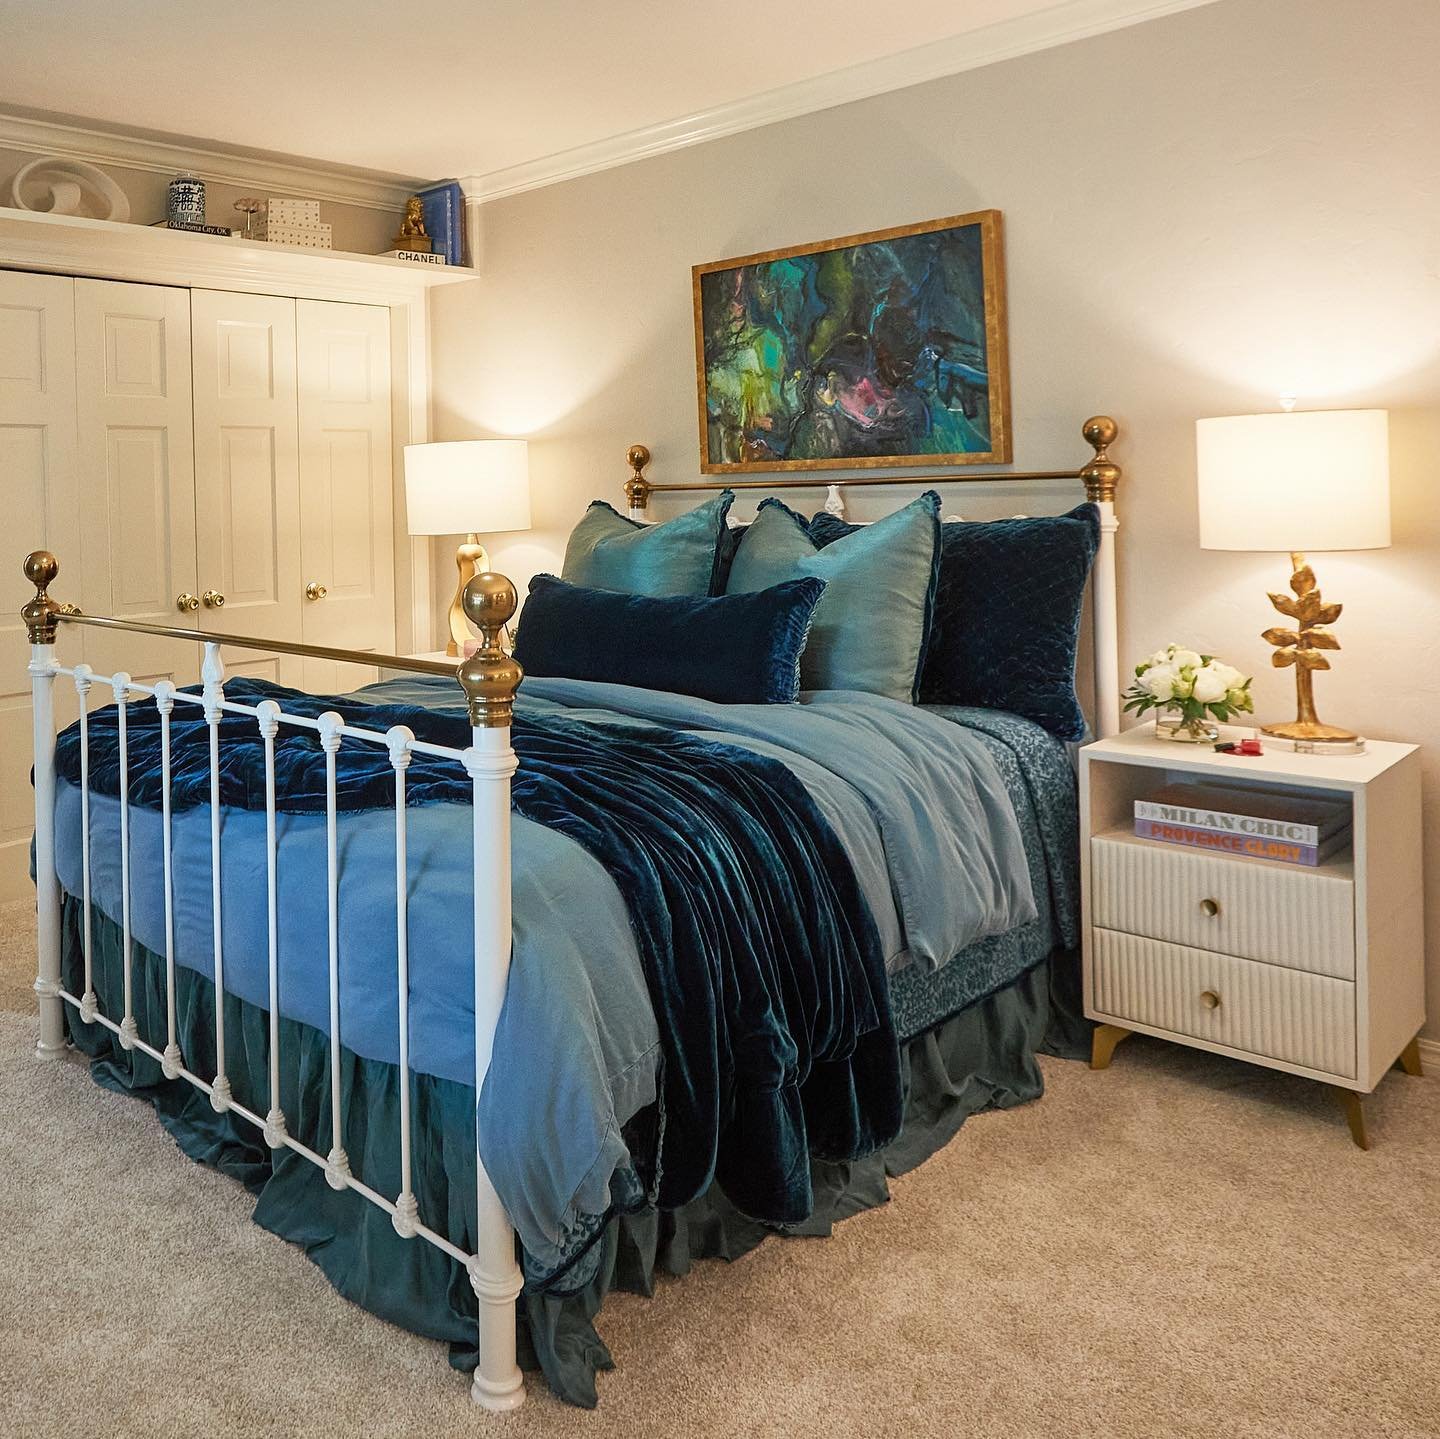 You won&rsquo;t want to miss our &ldquo;Bohemian Couture&rdquo; Bedroom at the OKC Symphony Show House, completed by our very talented OU Interior Design Interns. The highlight of the room is the livable luxury of the Bella Notte Bedding. All natural